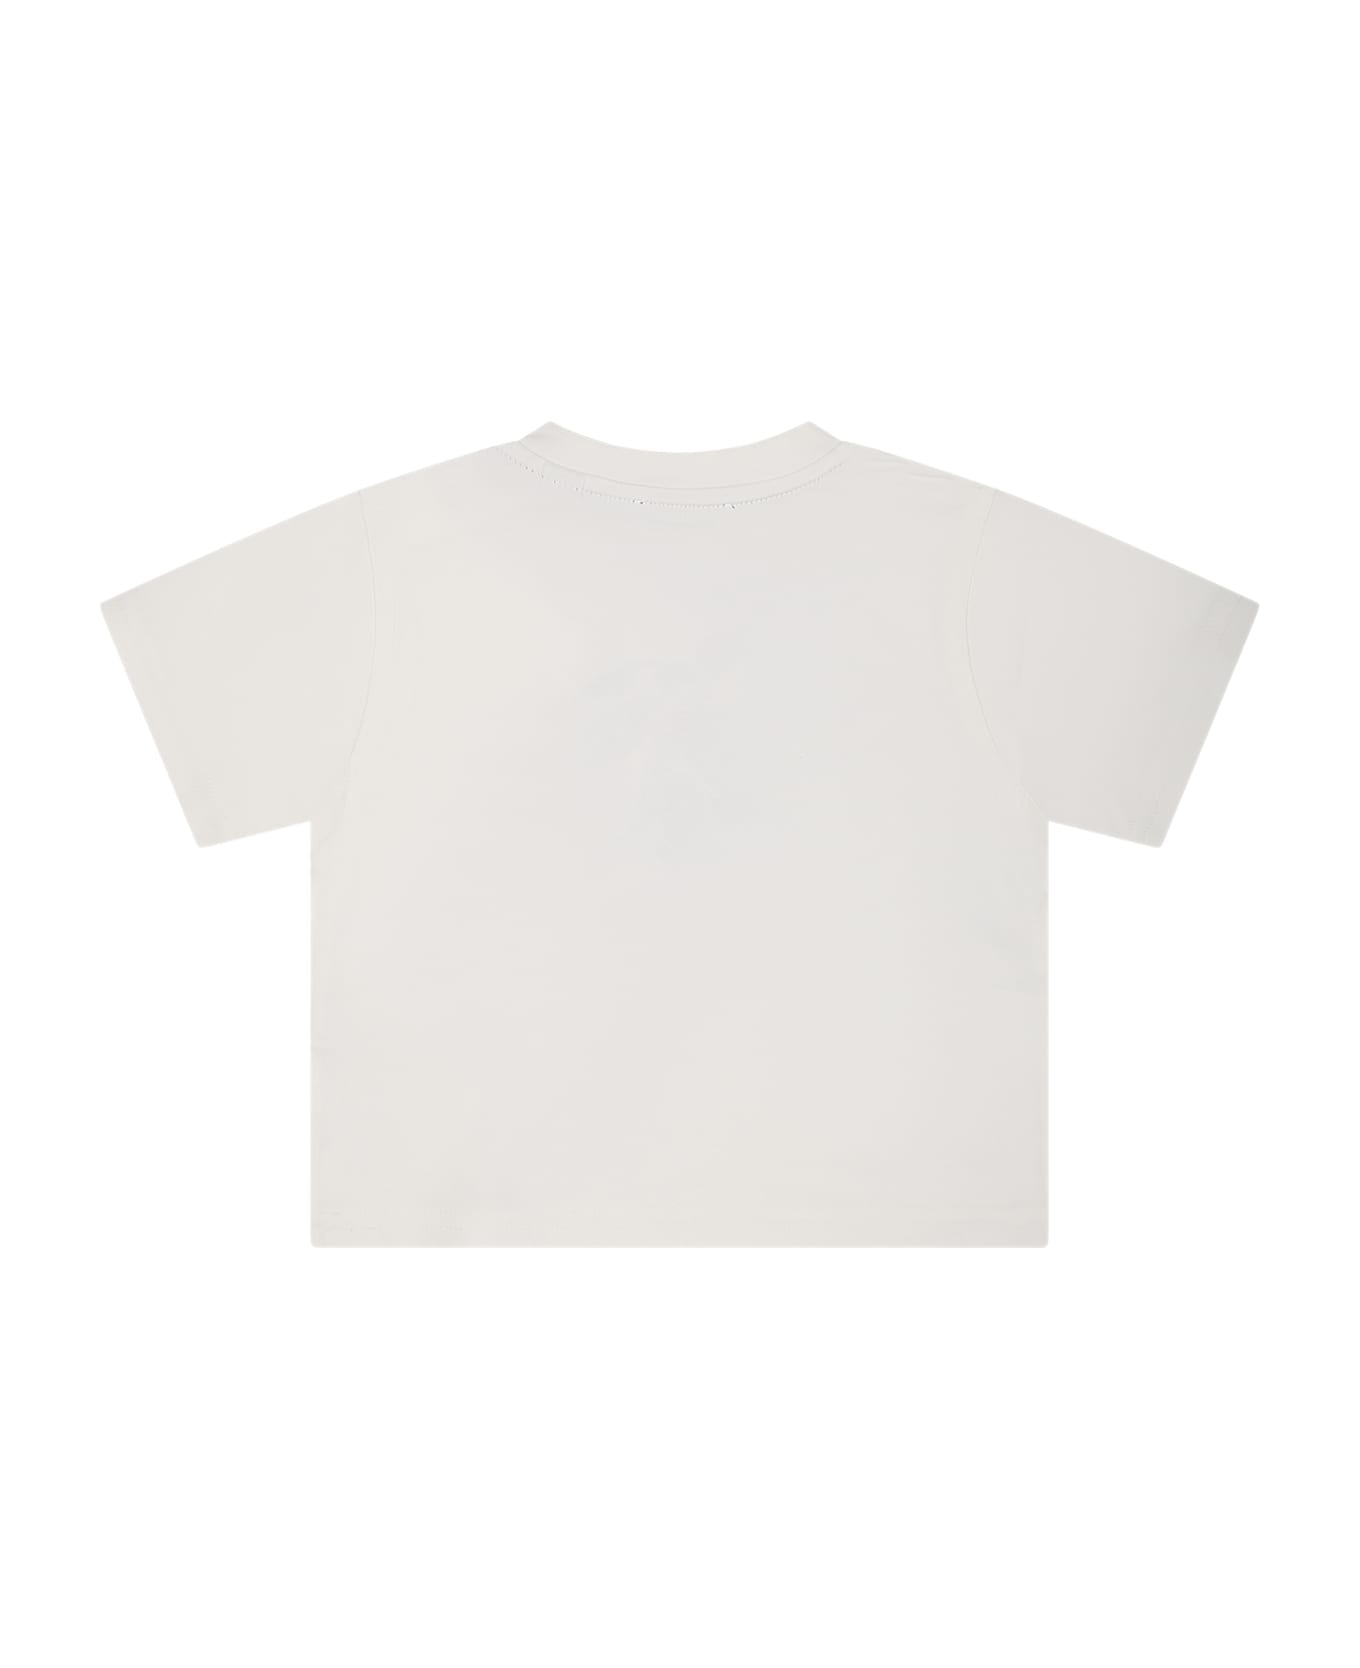 Burberry White T-shirt For Baby Boy With Print - White